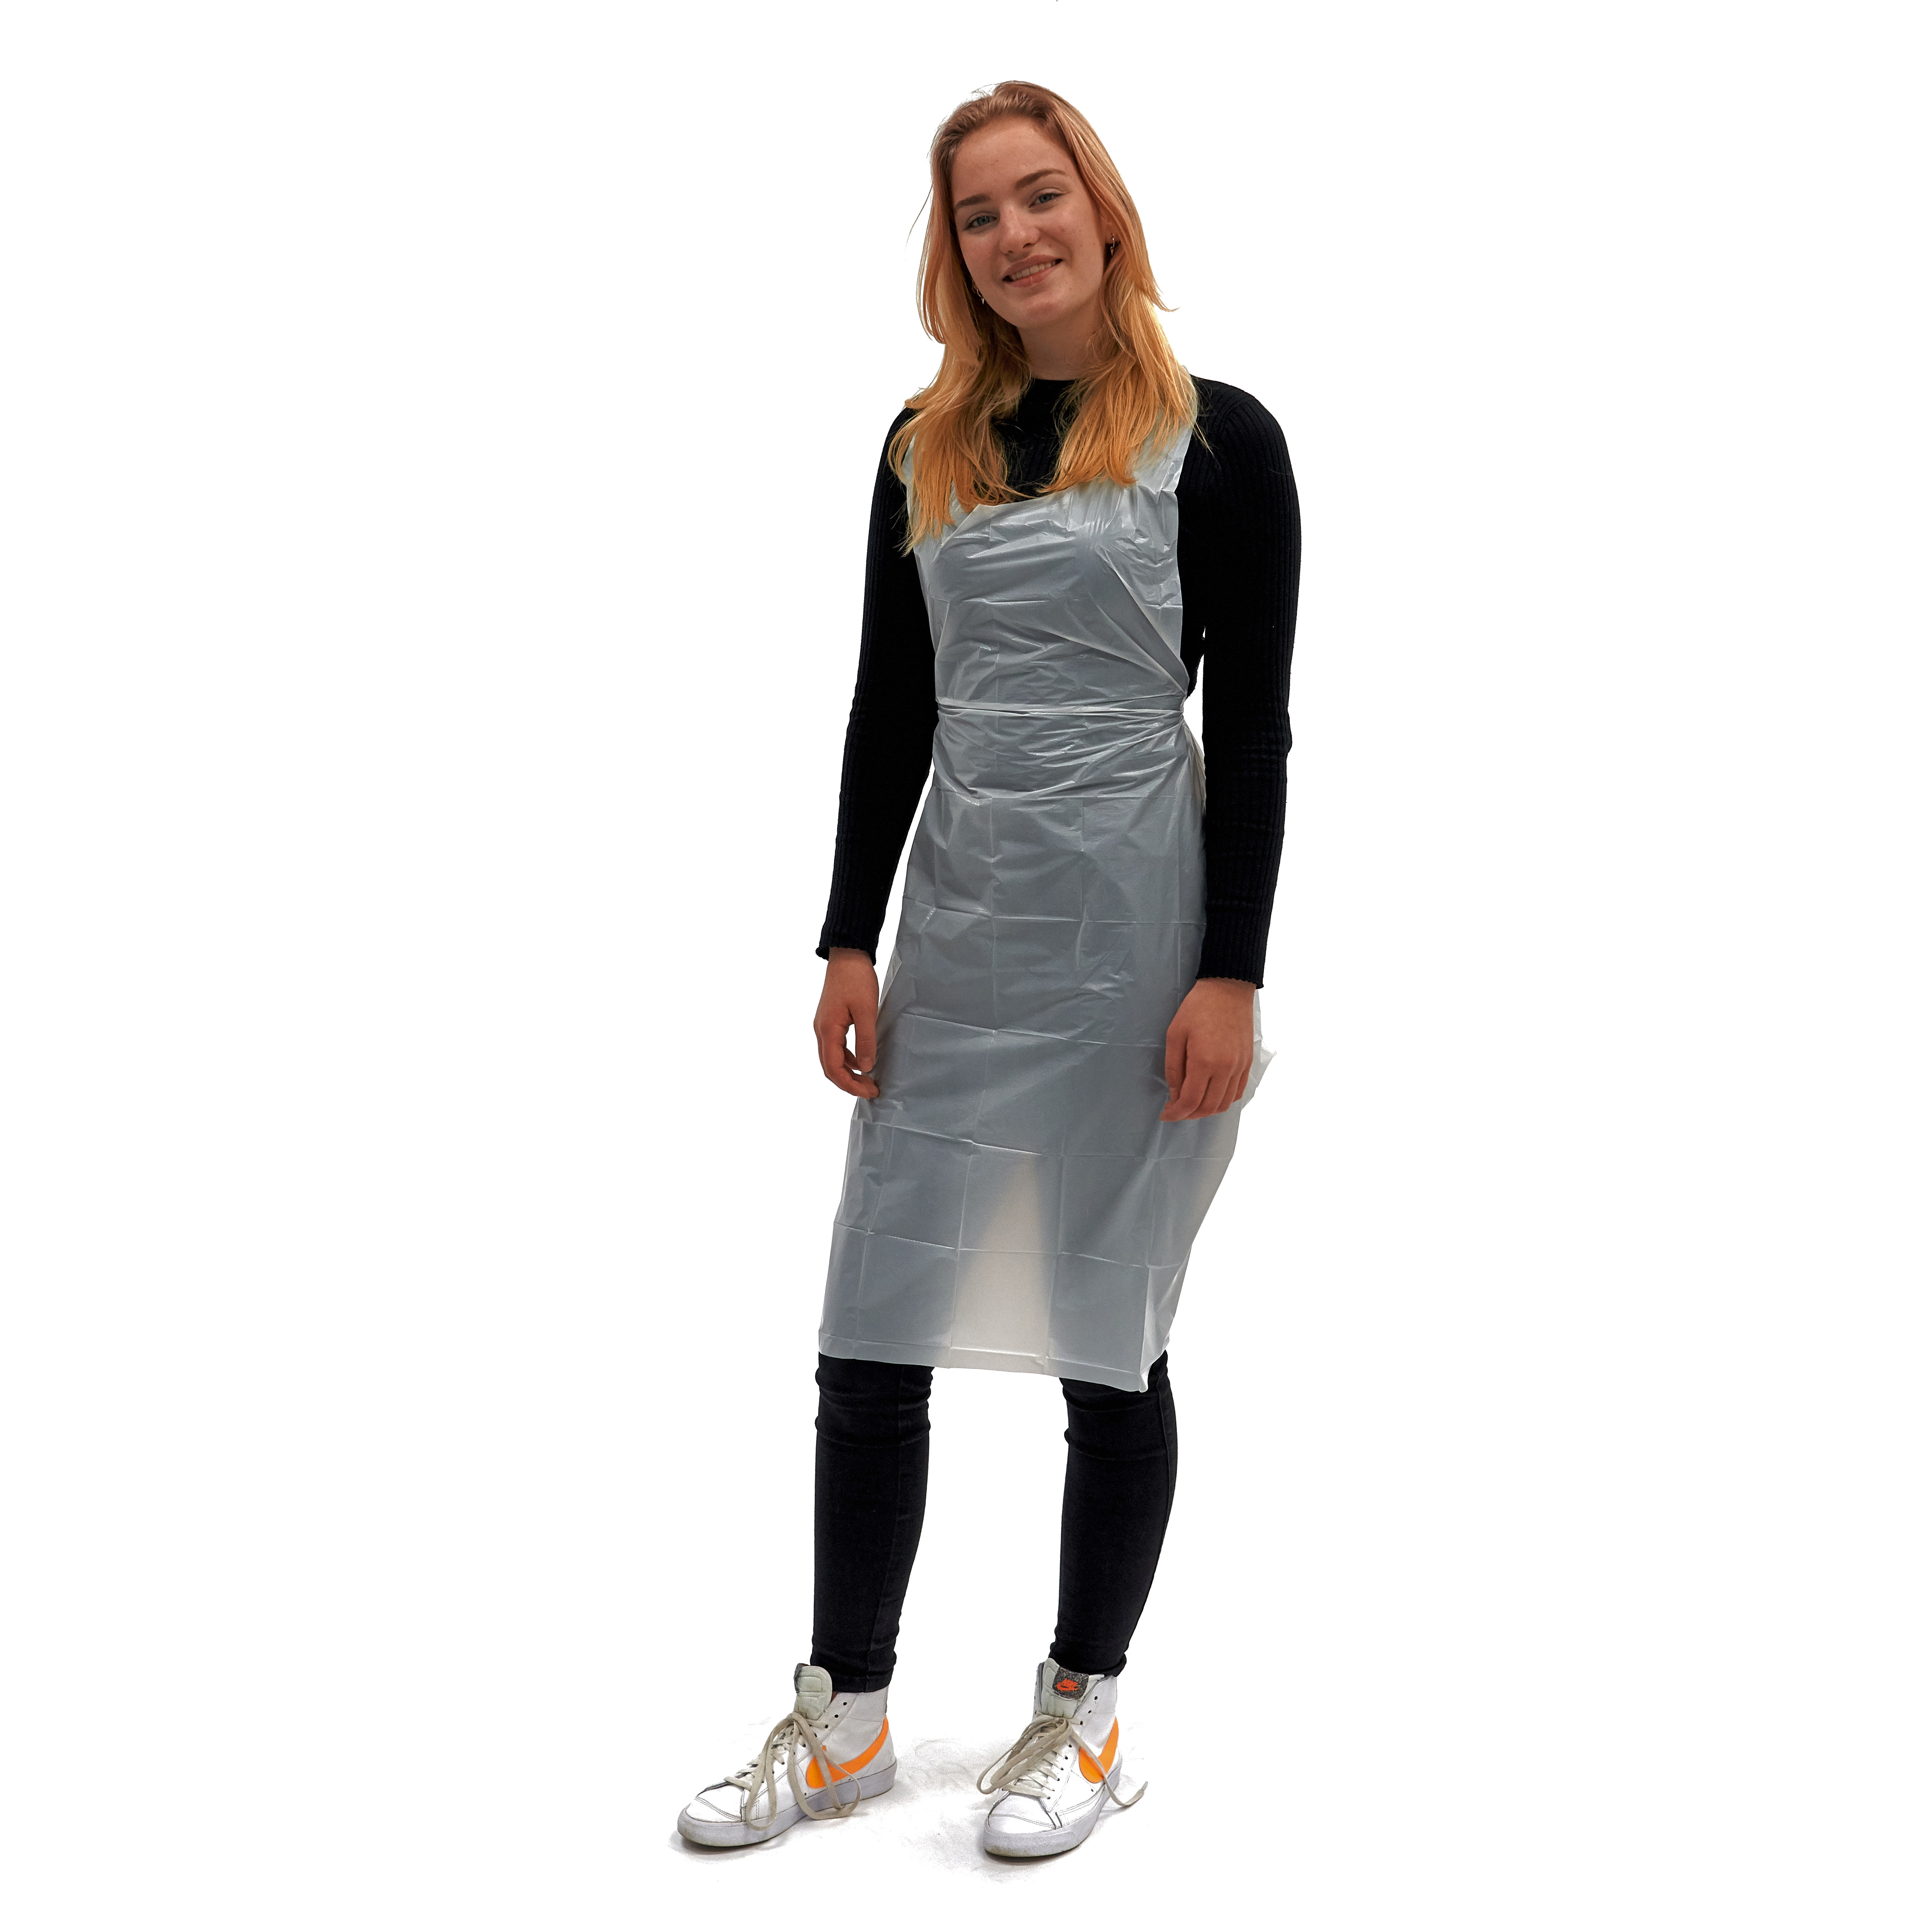 1/60 Romed polyethylene aprons+, disposable, white, extra strong, 80x125cm, per 100 pcs in a polybag, 10 x 100 pcs = 1.000 pcs in a carton.